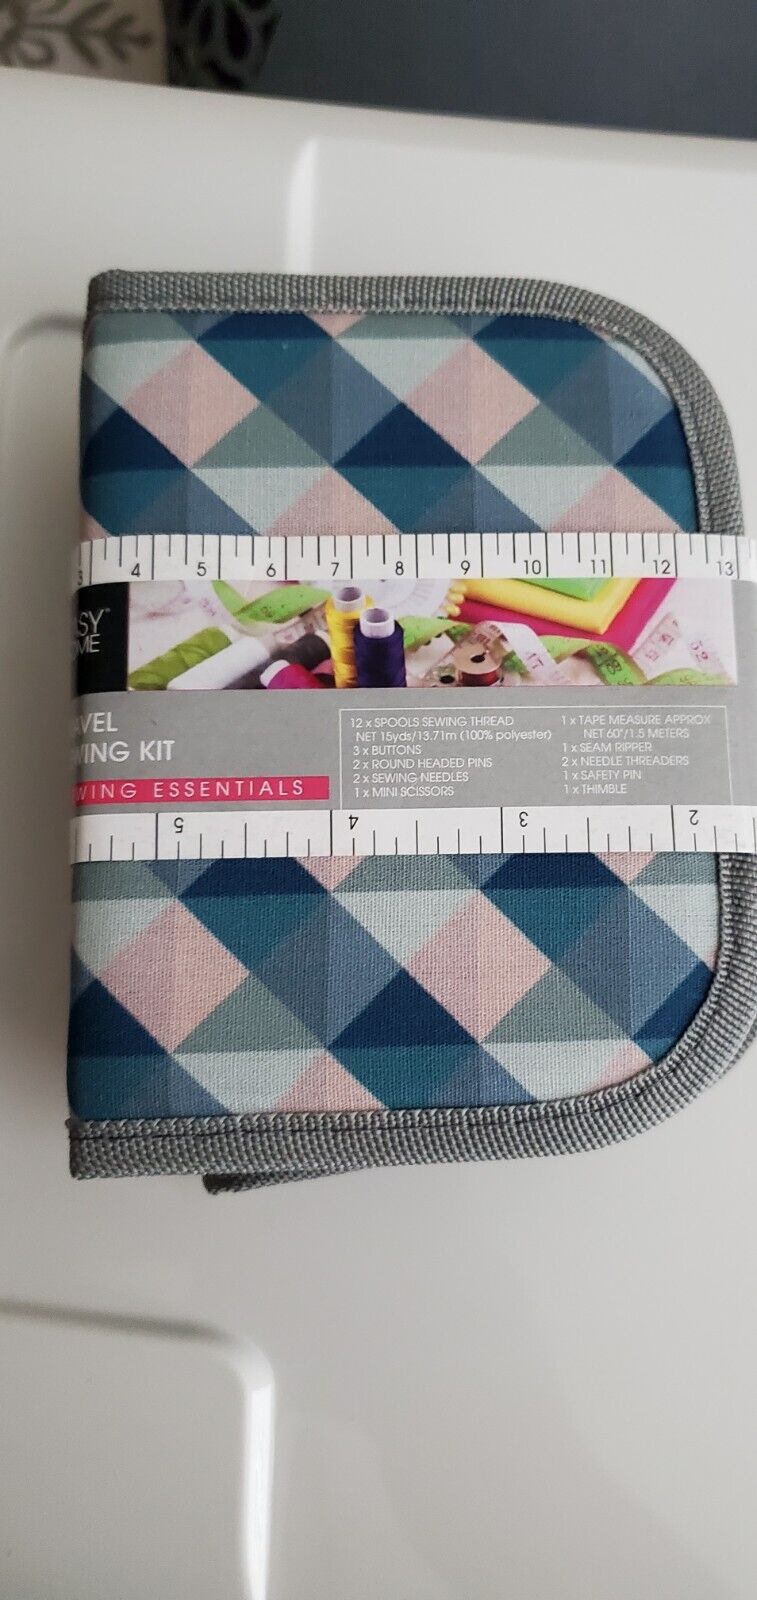 Easy Home Travel Sewing Kit Blue Case Brand New